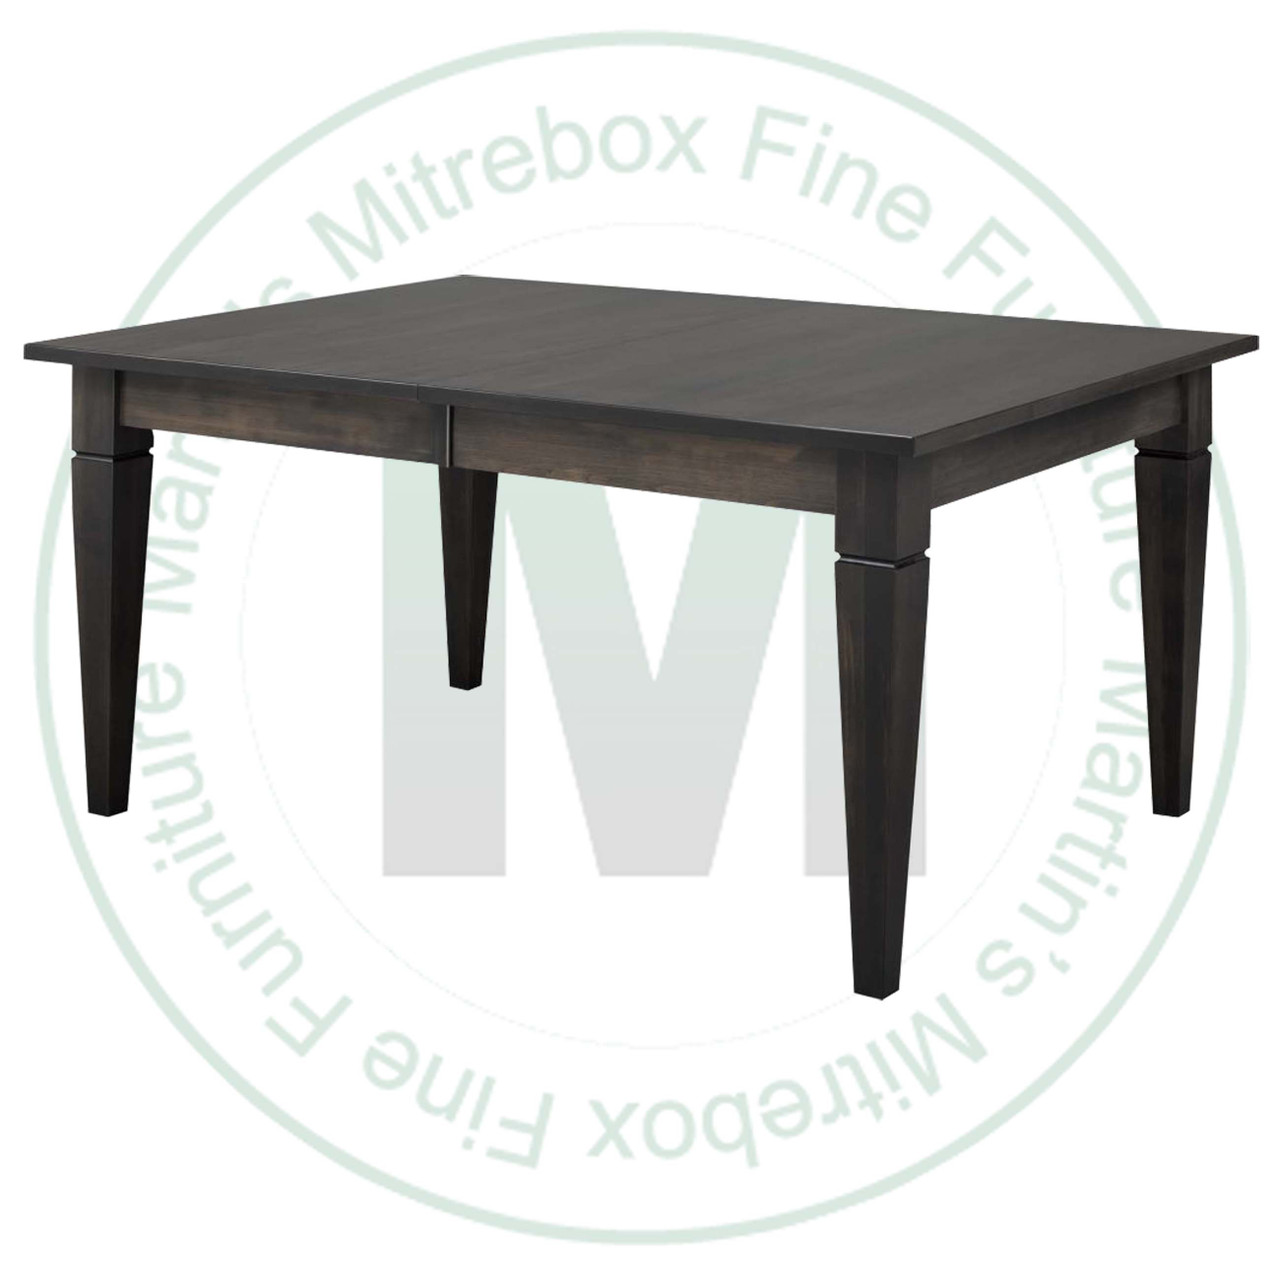 Maple Reesor Extension Harvest Table 48''D x 60''W x 30''H With 3 - 12'' Leaves Table Has 1.25'' Thick Top